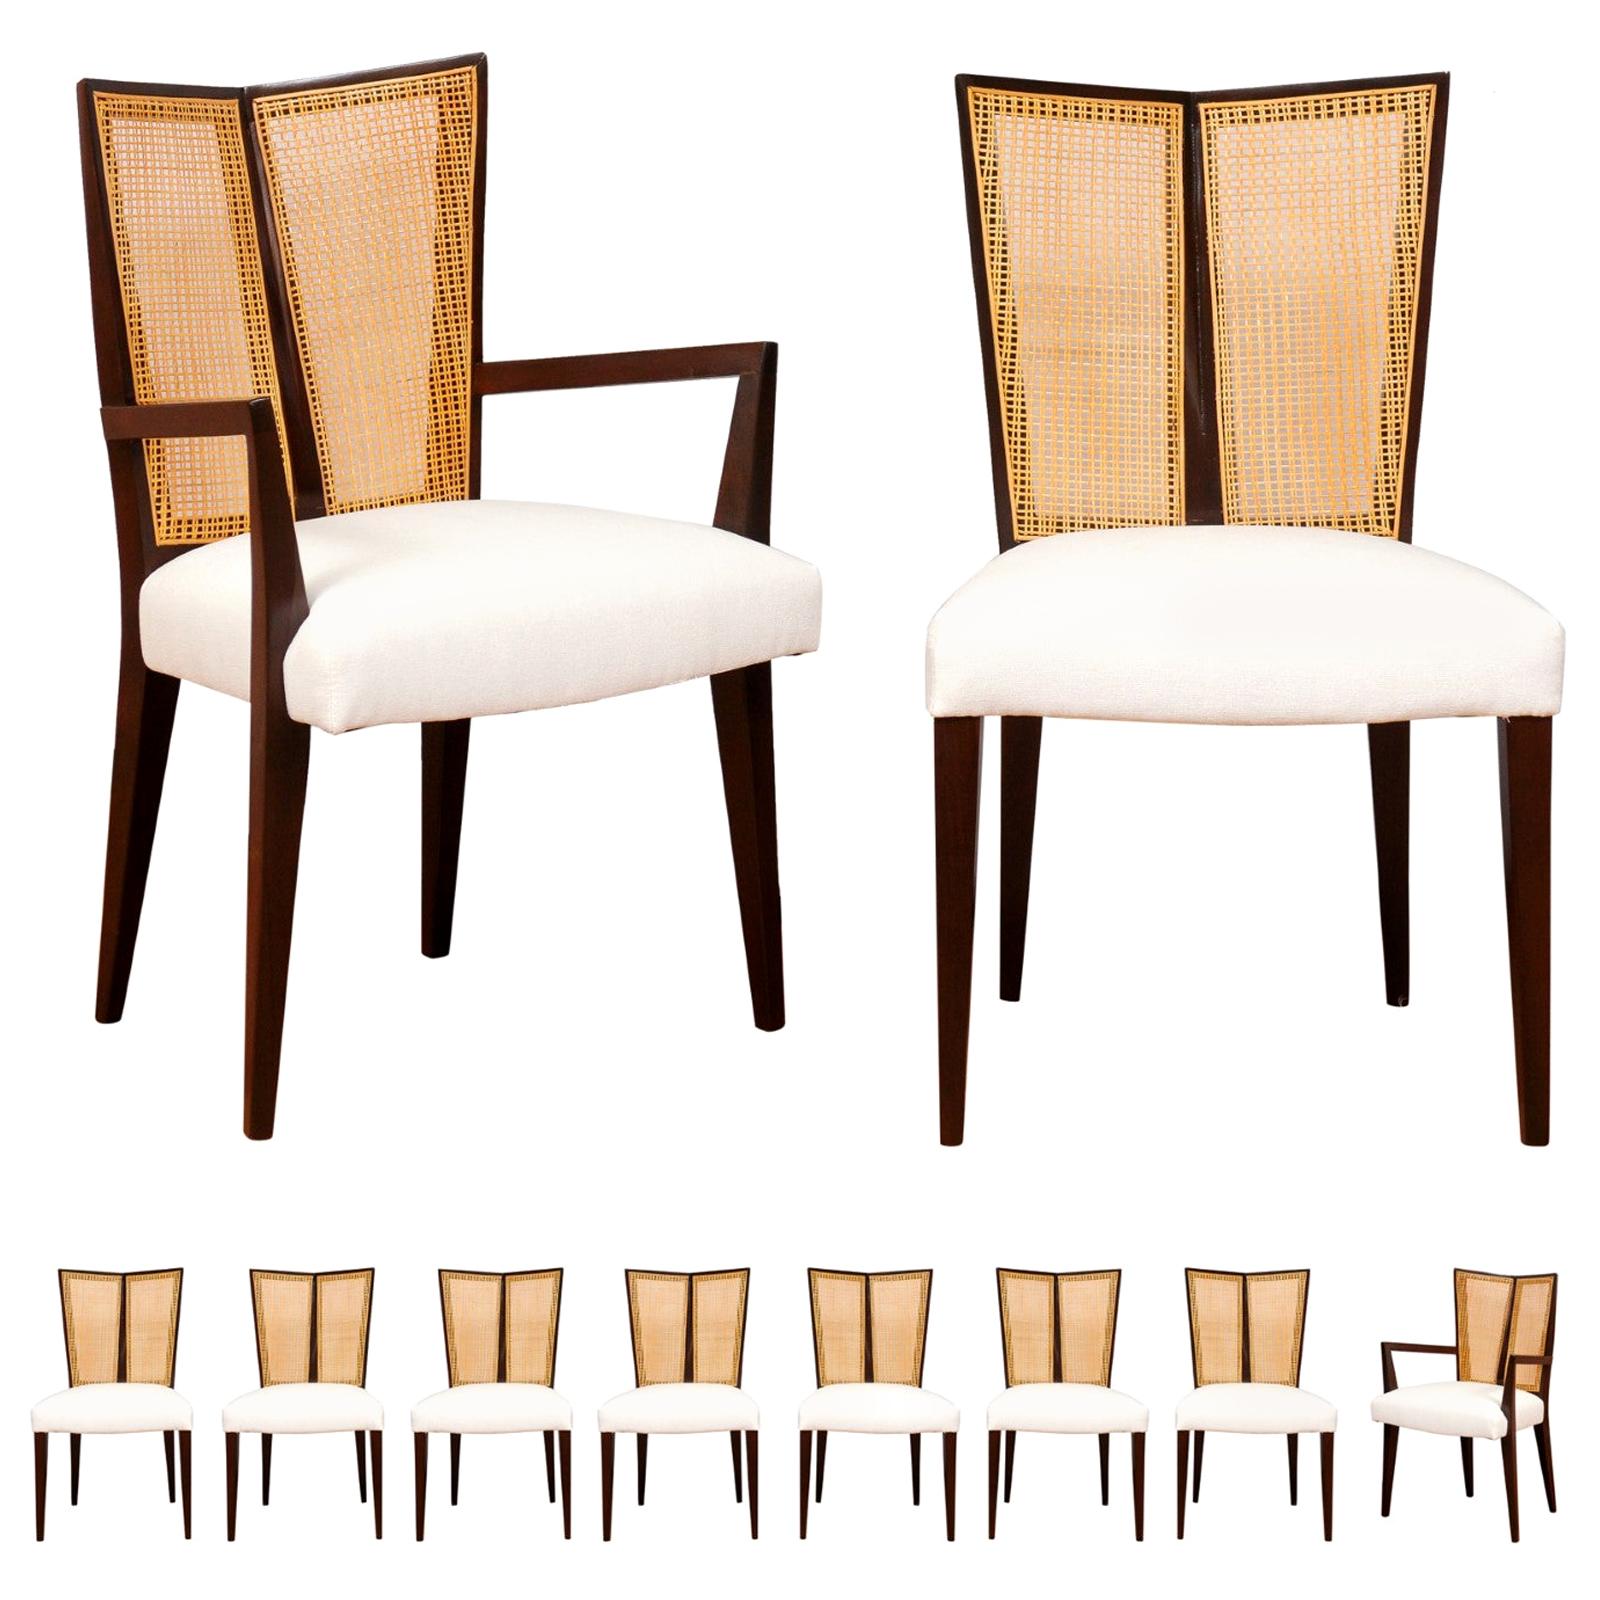 Breathtaking Set of 10 Modern V-Back Cane Chairs by Michael Taylor, circa 1960